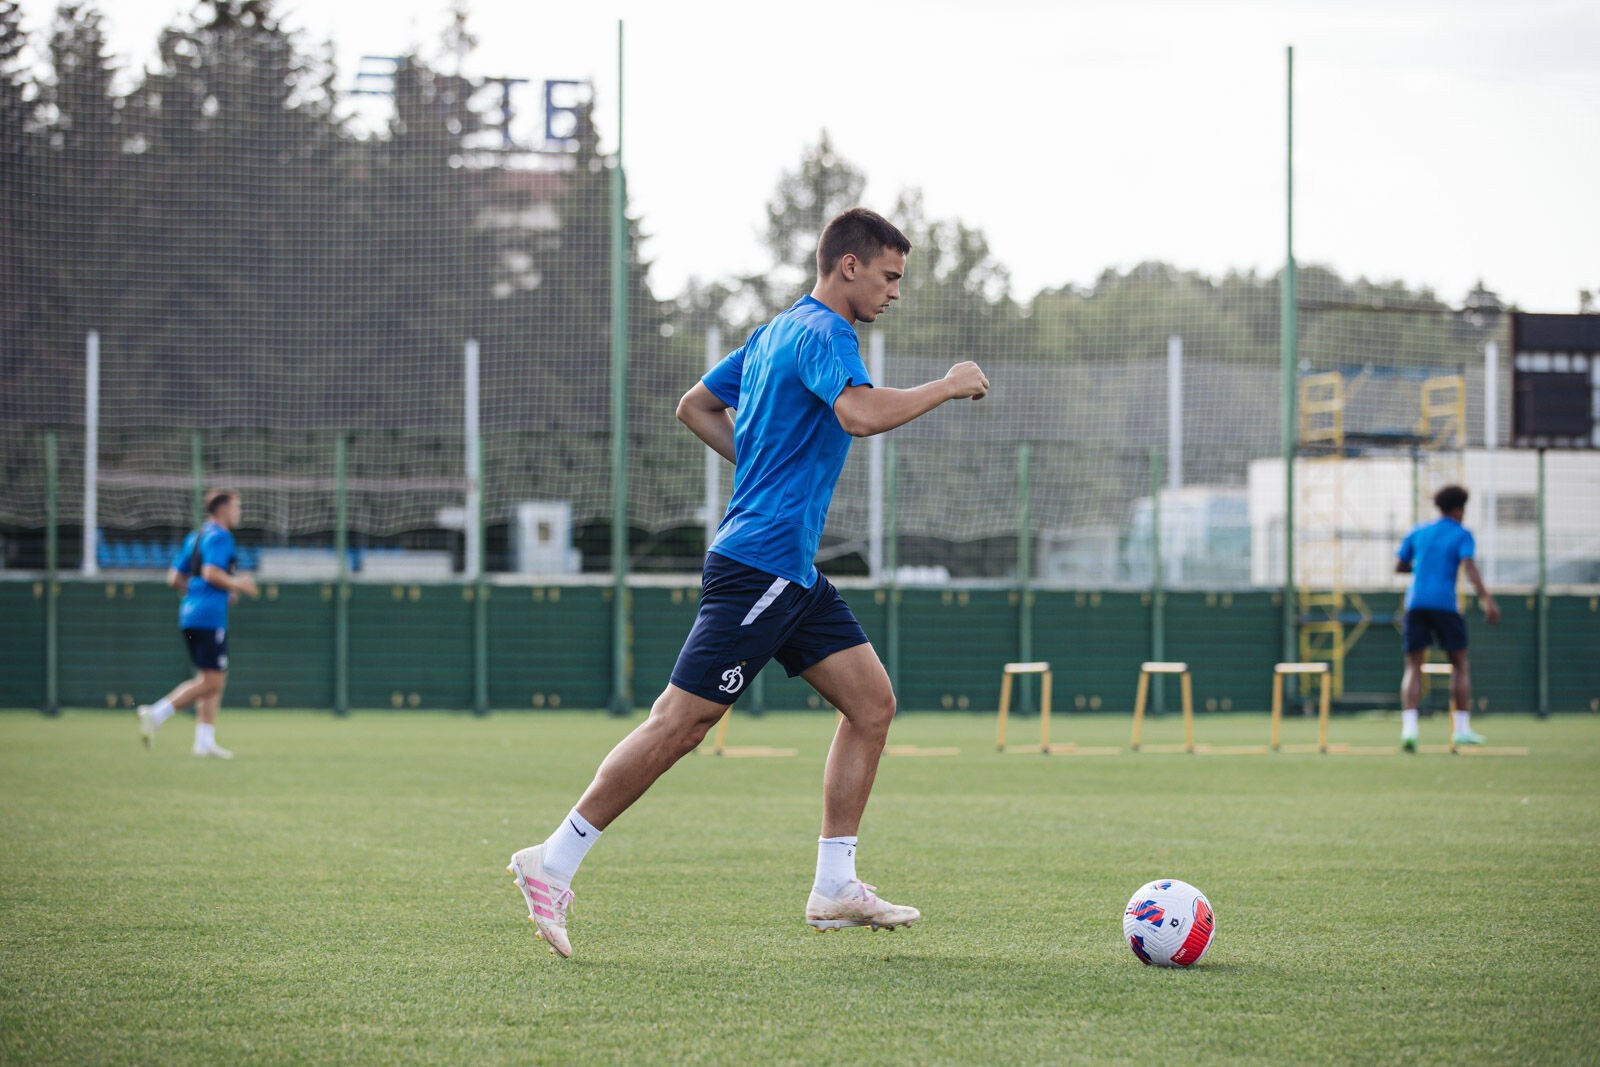 Training session before the match against Ufa